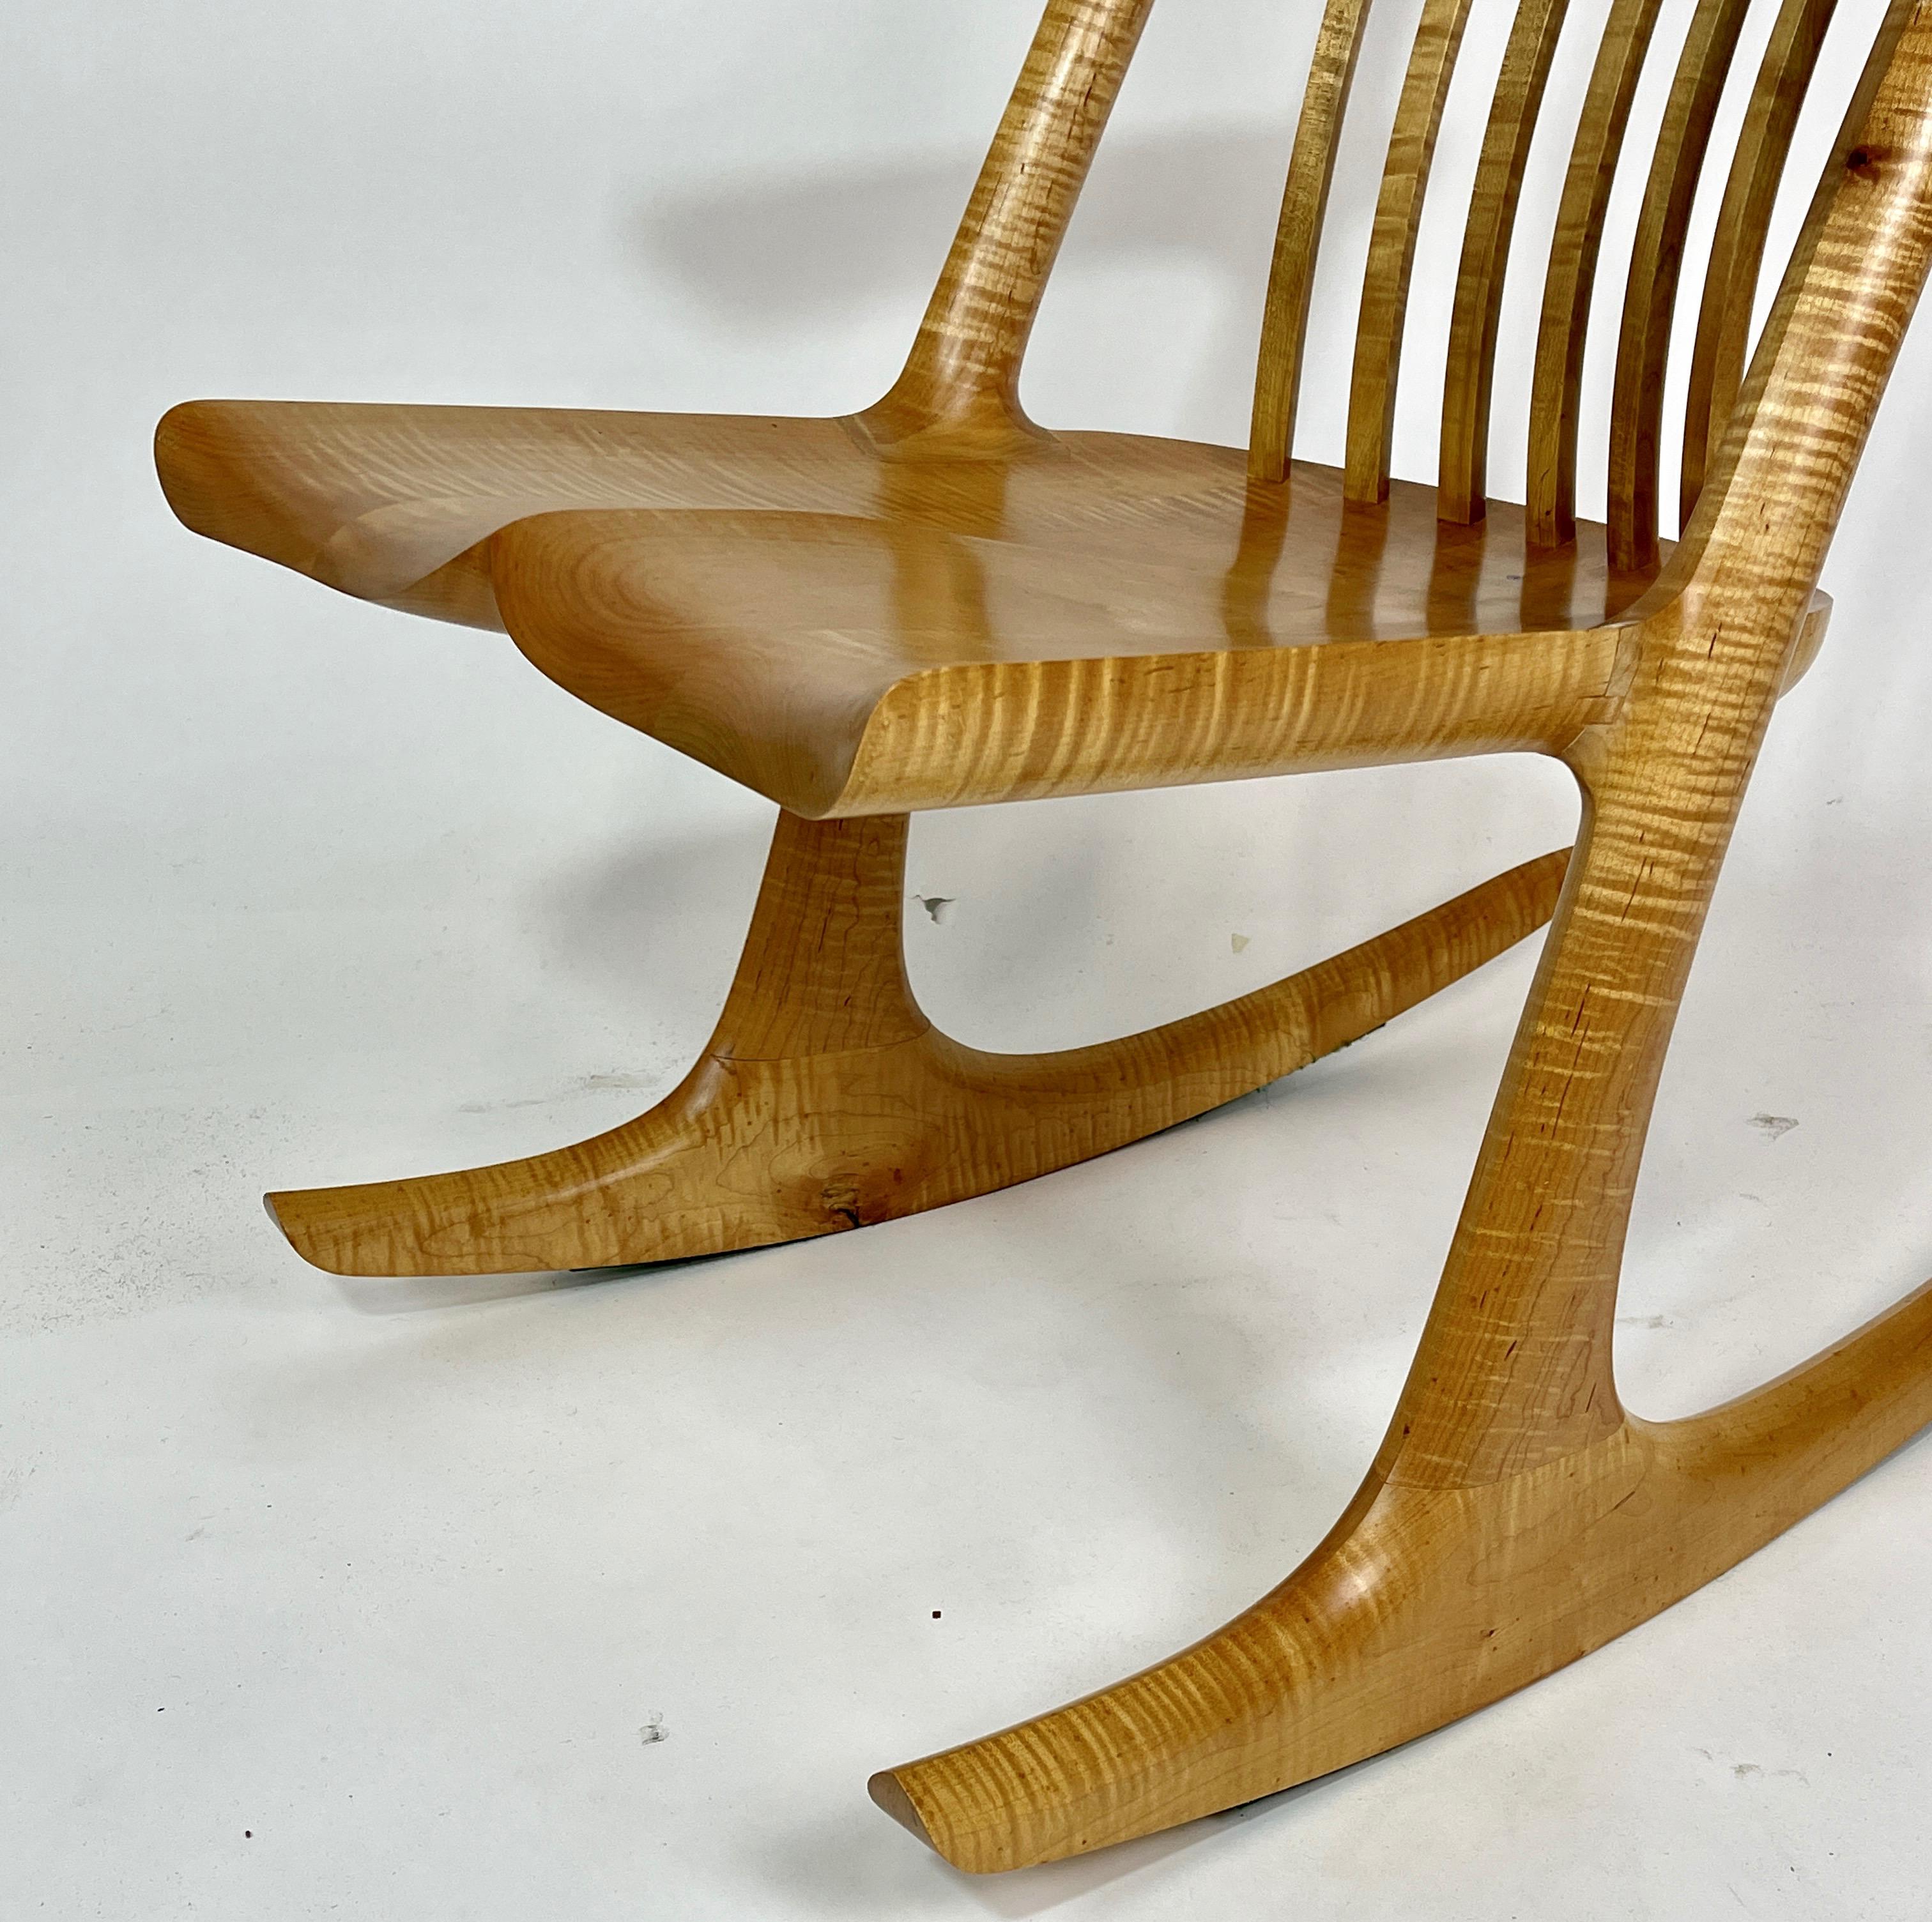 Amazing sleek handcrafted solid curly maple rocker, or console. This one of a kind piece was made by master craftsman Michael Gregorio of upstate NY.

About Michael Gregorio: In a one car garage at age 13, with a few hand tools, determination and